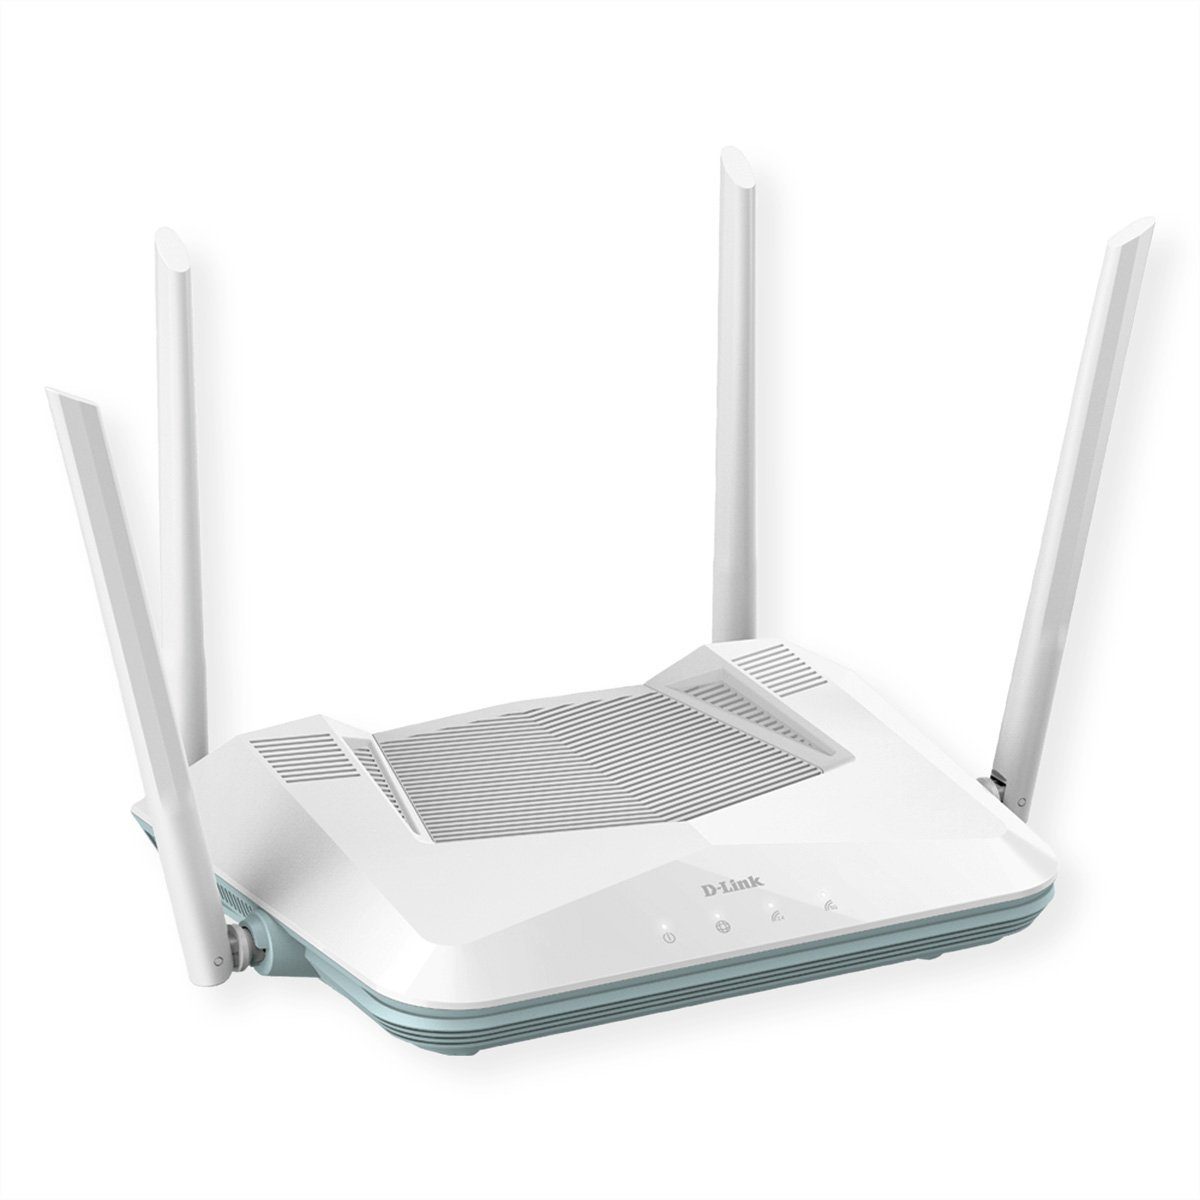 D-Link R32/E EaglePro Smart Router 6, WiFi AX3200, MU-MIMO WLAN-Router, AI